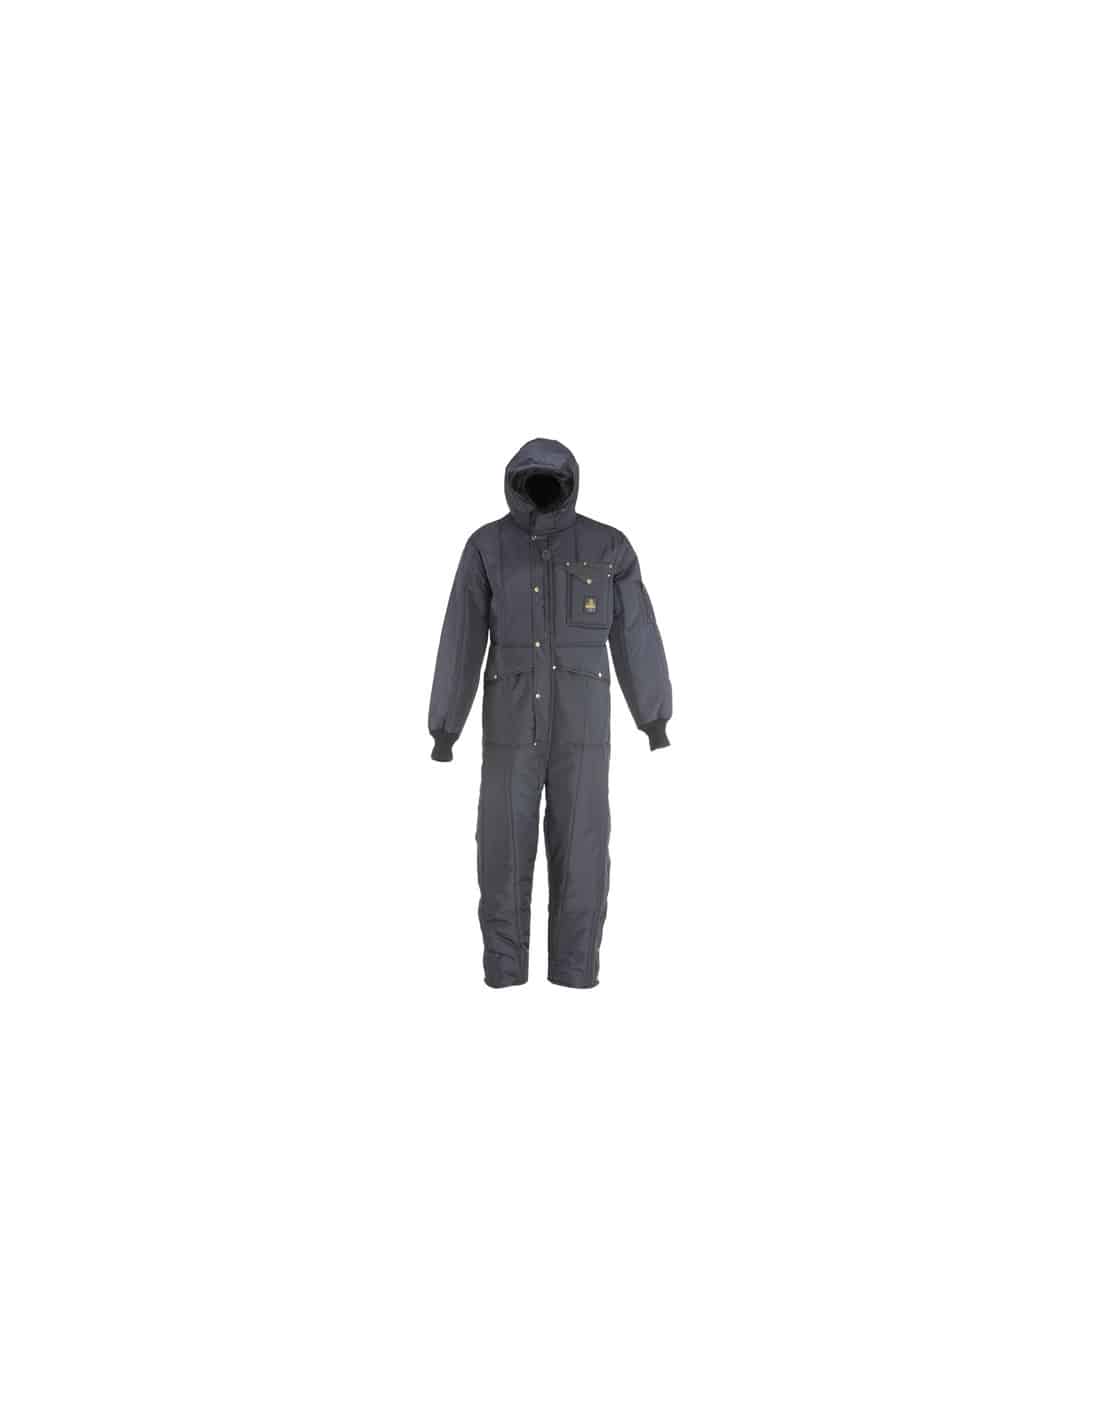 RefrigiWear Mens Iron-Tuff Insulated Coveralls with Hood 50F Extreme Cold Suit 